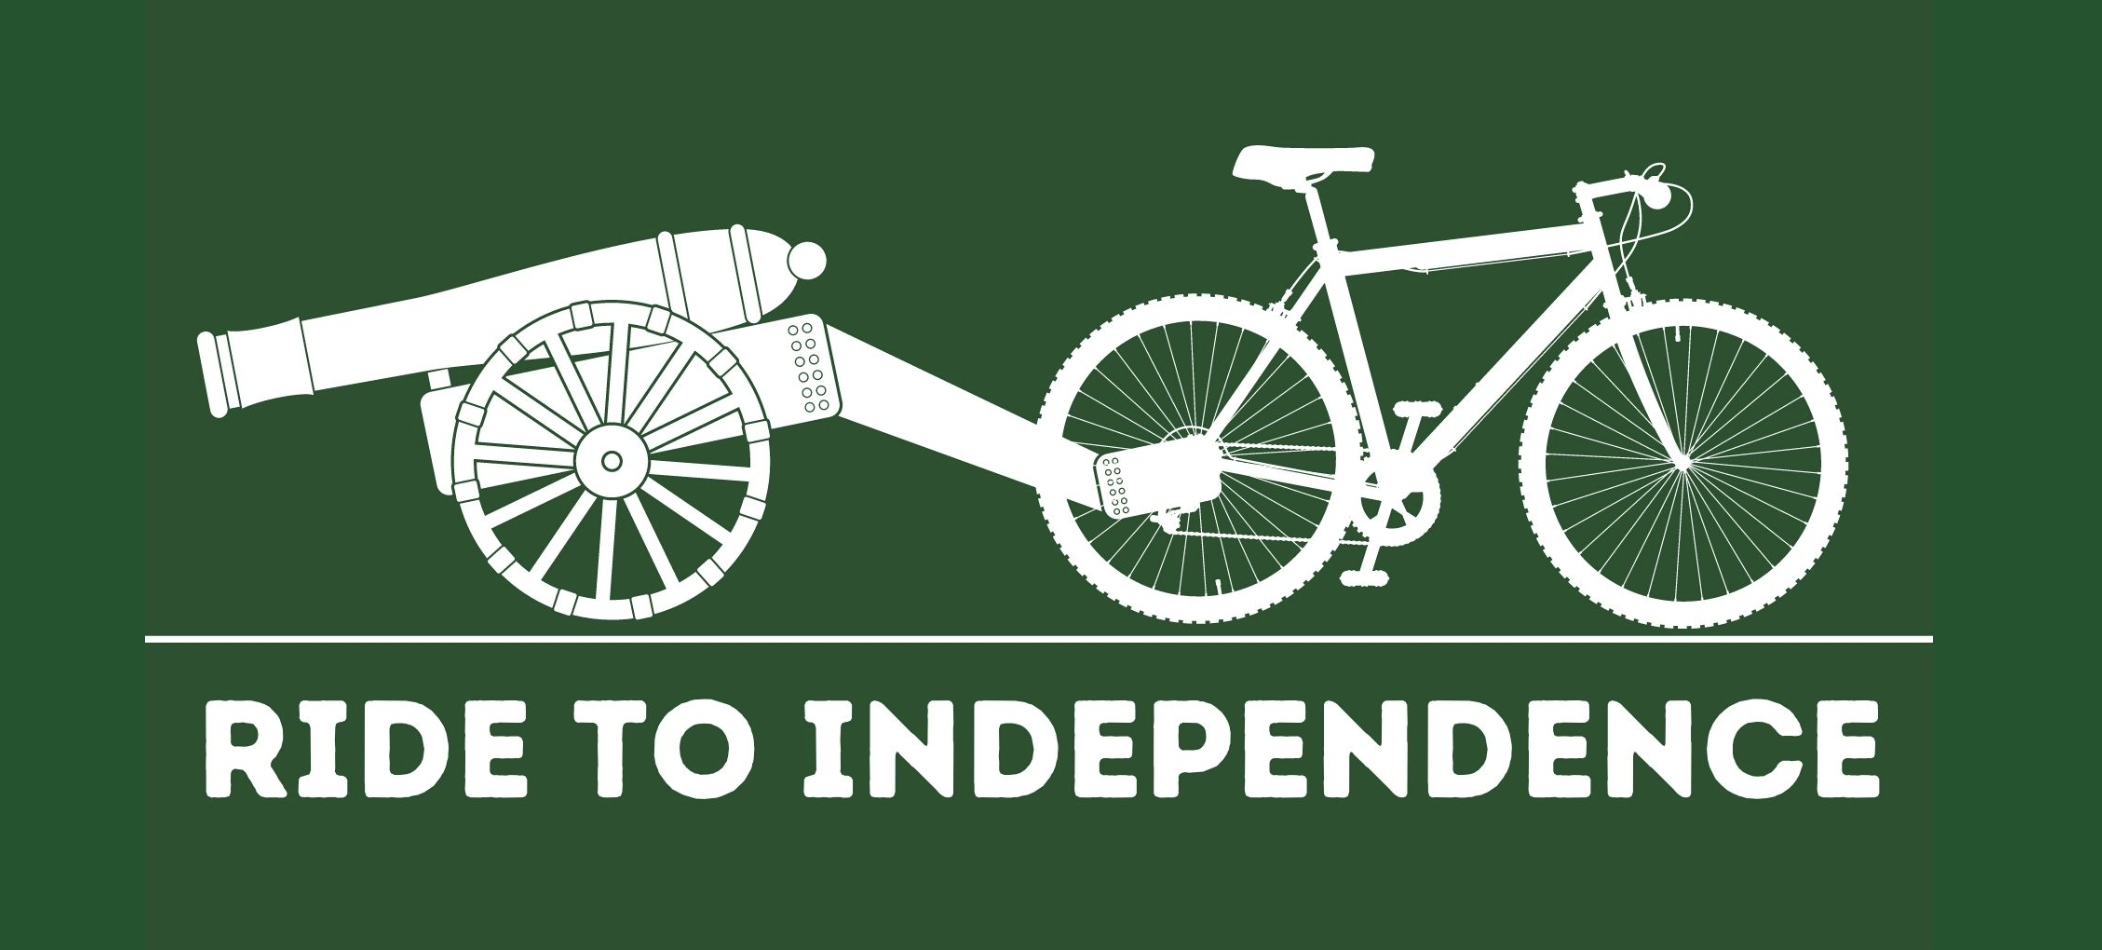 Ride to Independence